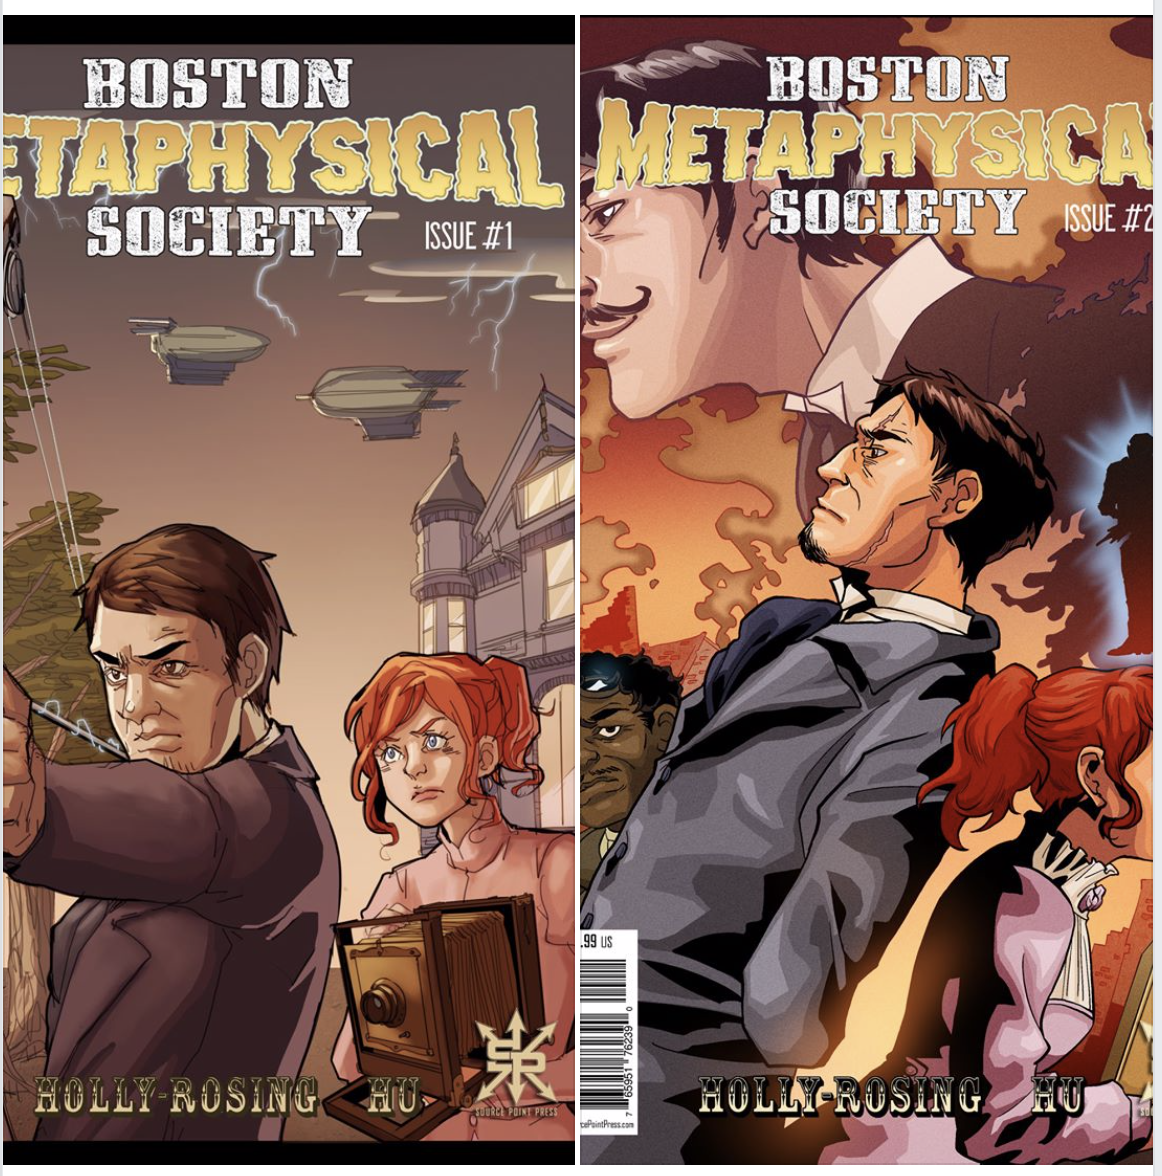 Boston Metaphysical Society #1 & #2 of the original six issue mini-series  are now available in PREVIEWSworld